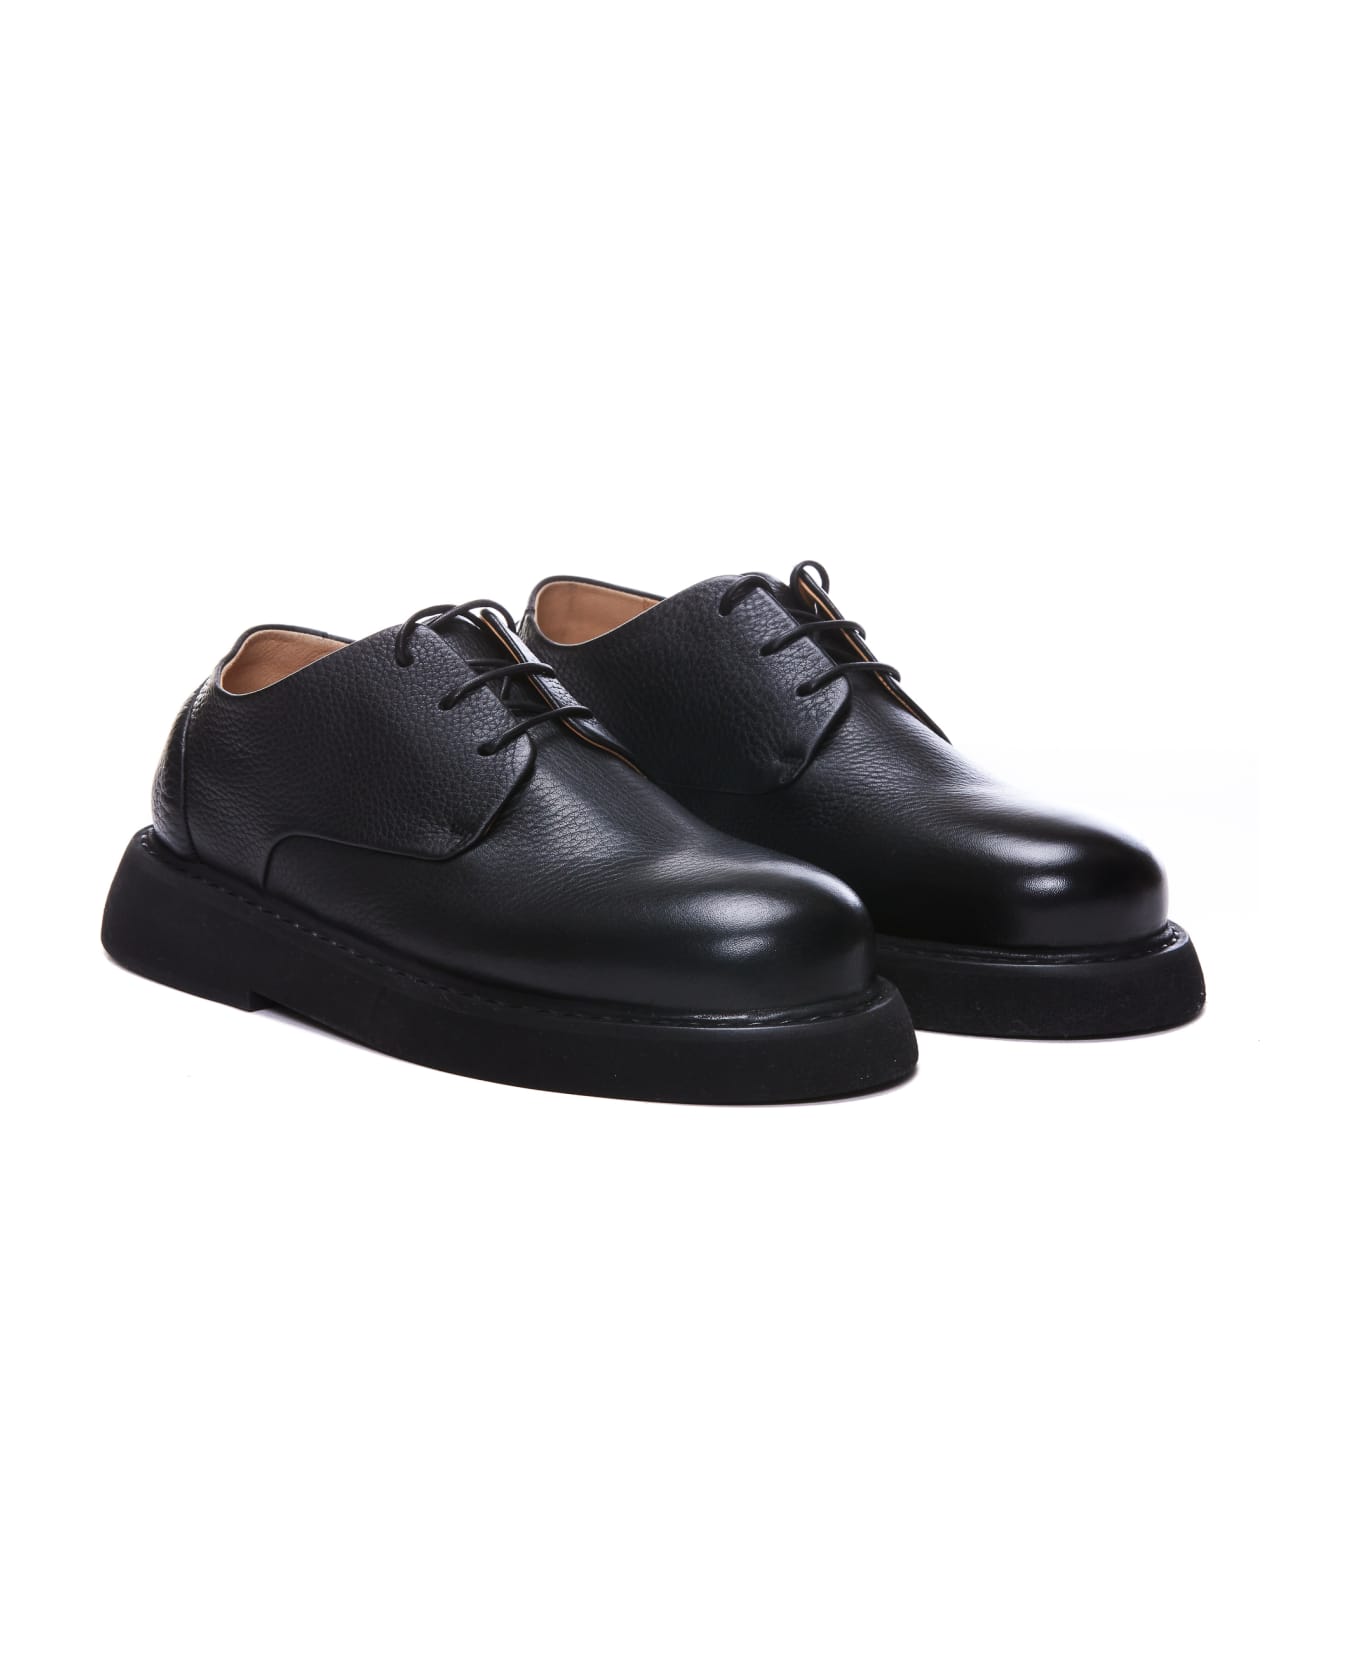 Marsell Spalla Laced Up Shoes - Black